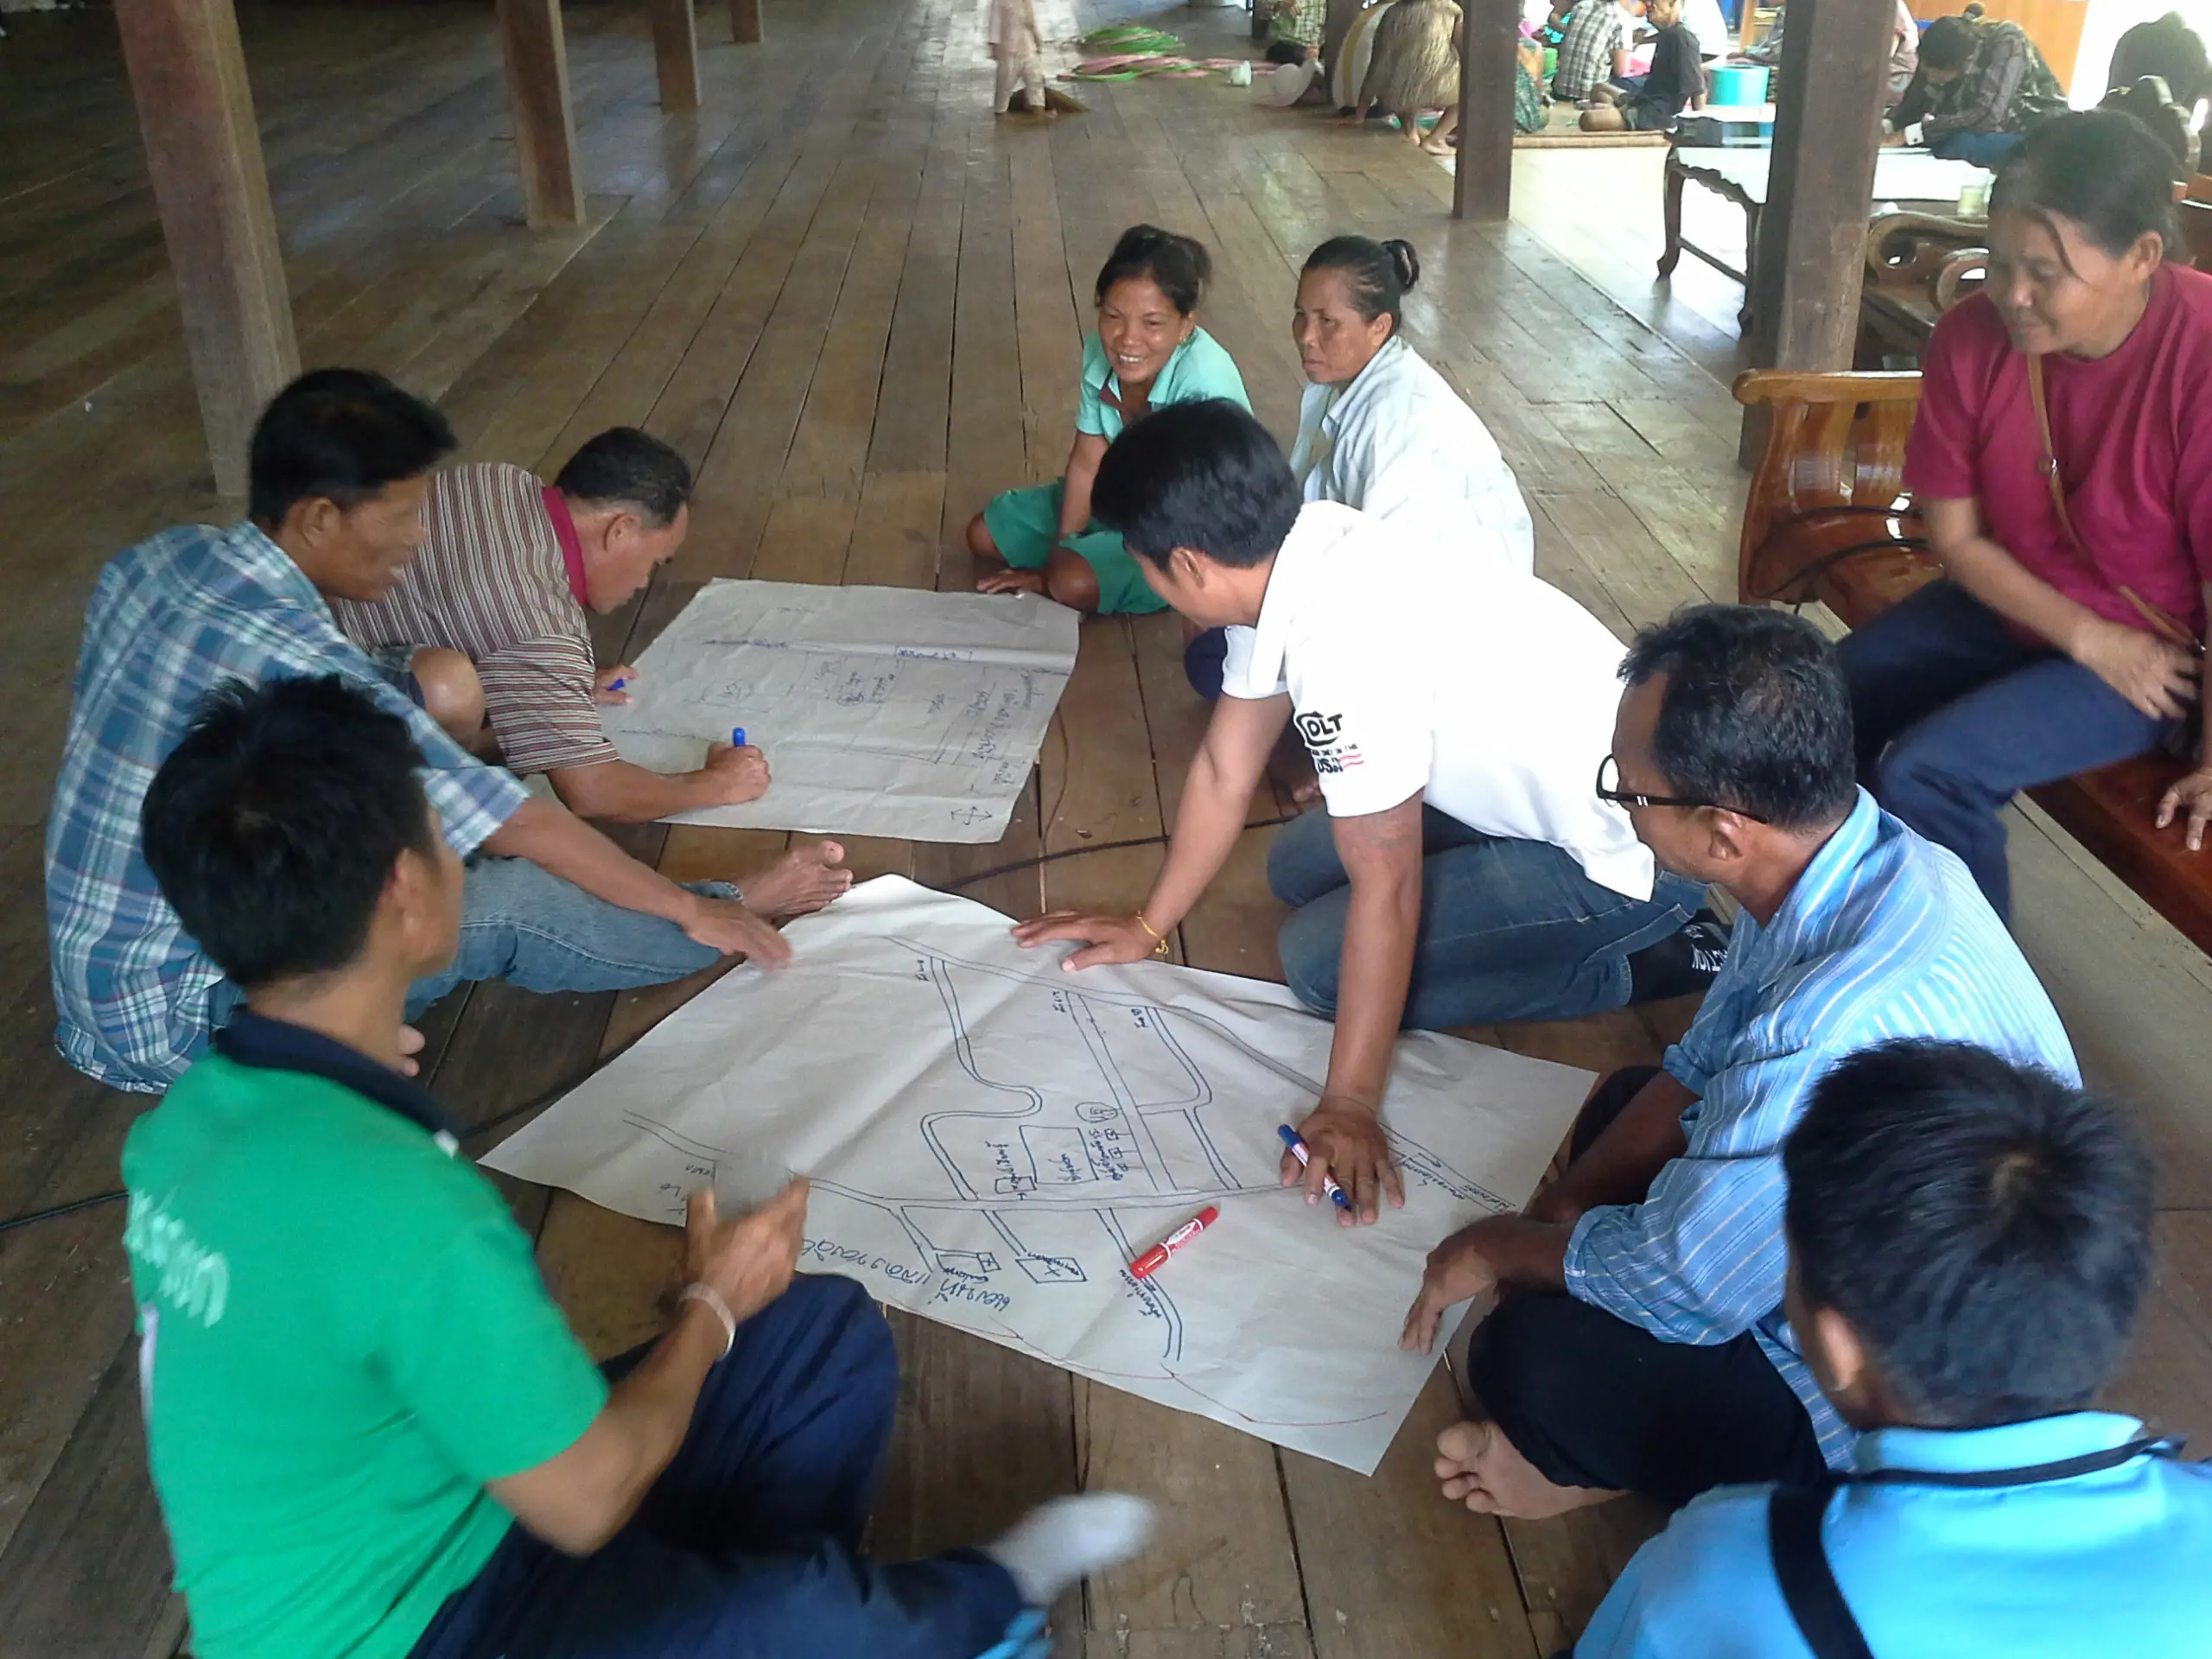 Villagers participate in identifying natural and cultural attractions within the village